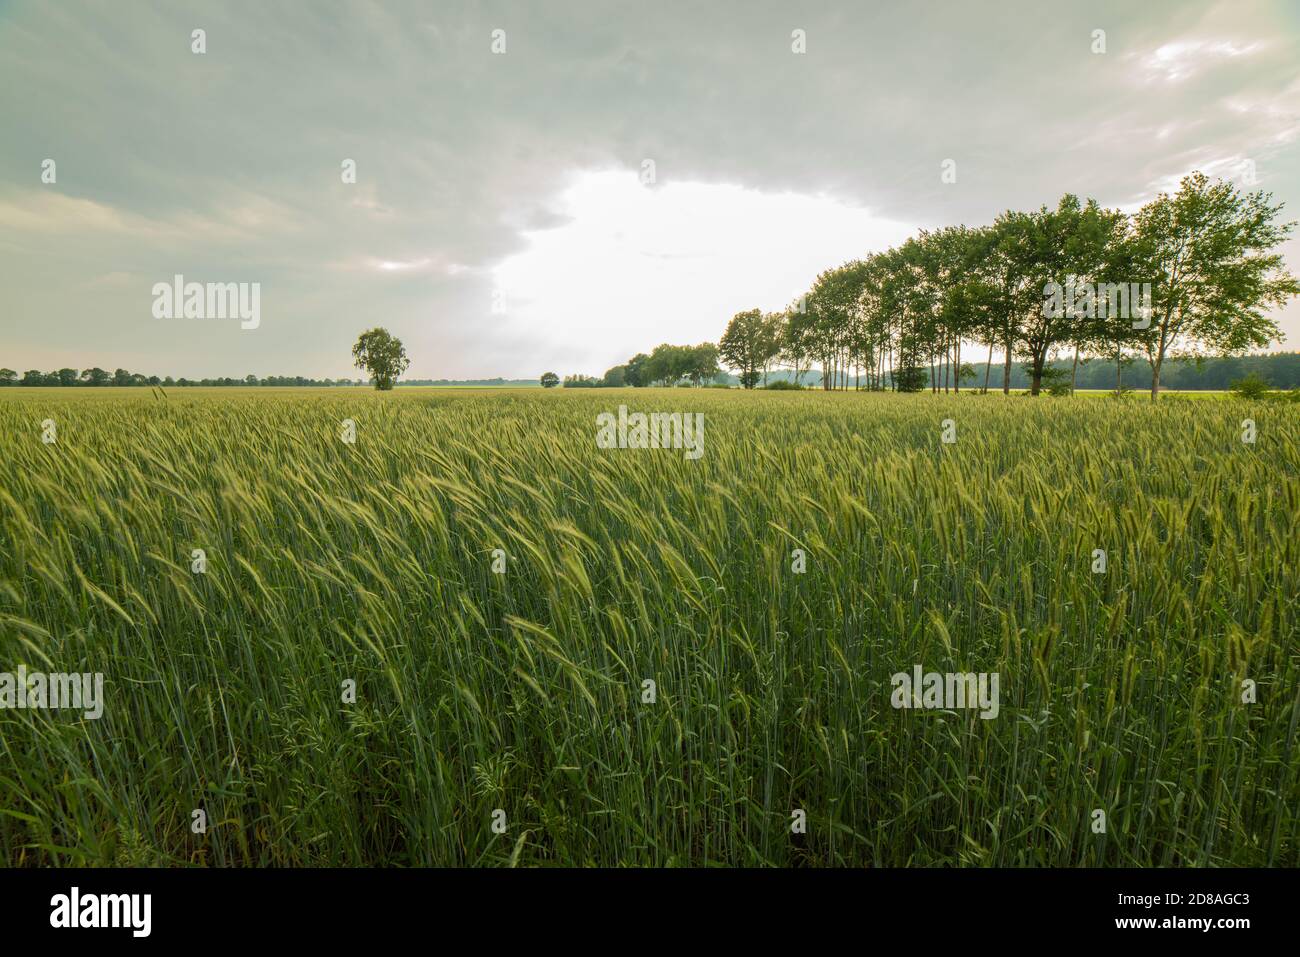 Rye field in may. A light breeze weighs the grain. The grain field is framed by trees. The rye is still green. Cloudy sky during sunset. Stock Photo